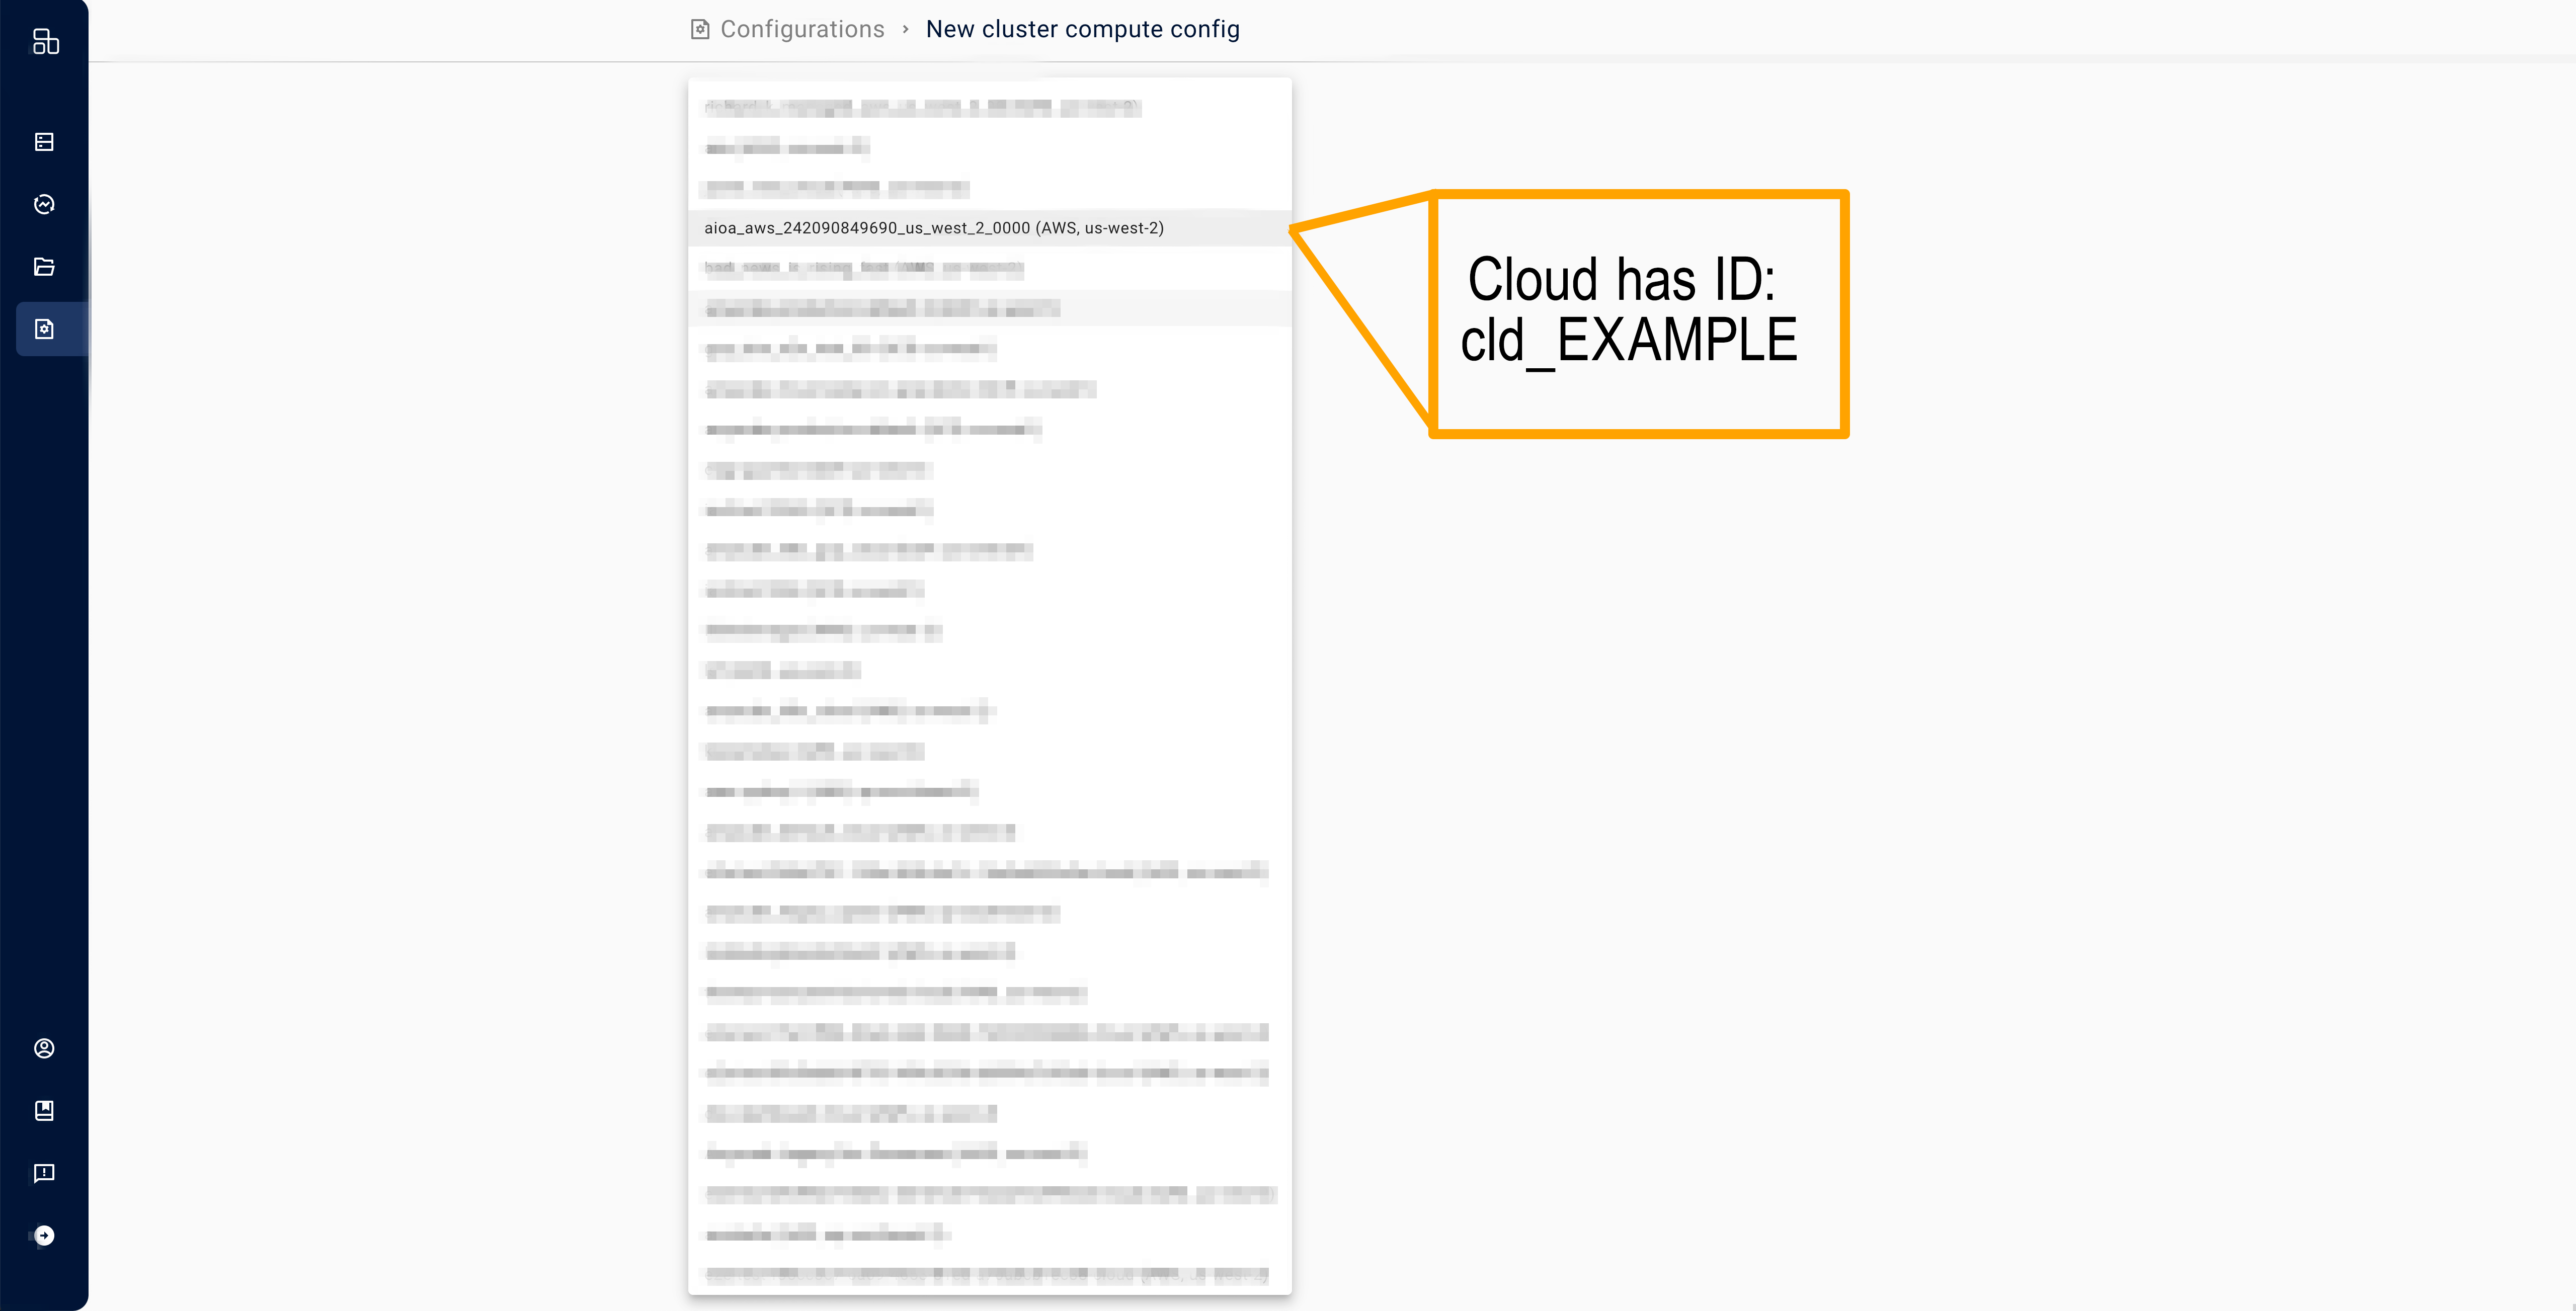 Select the Cloud that matches the ID you used for your Trust Relationship